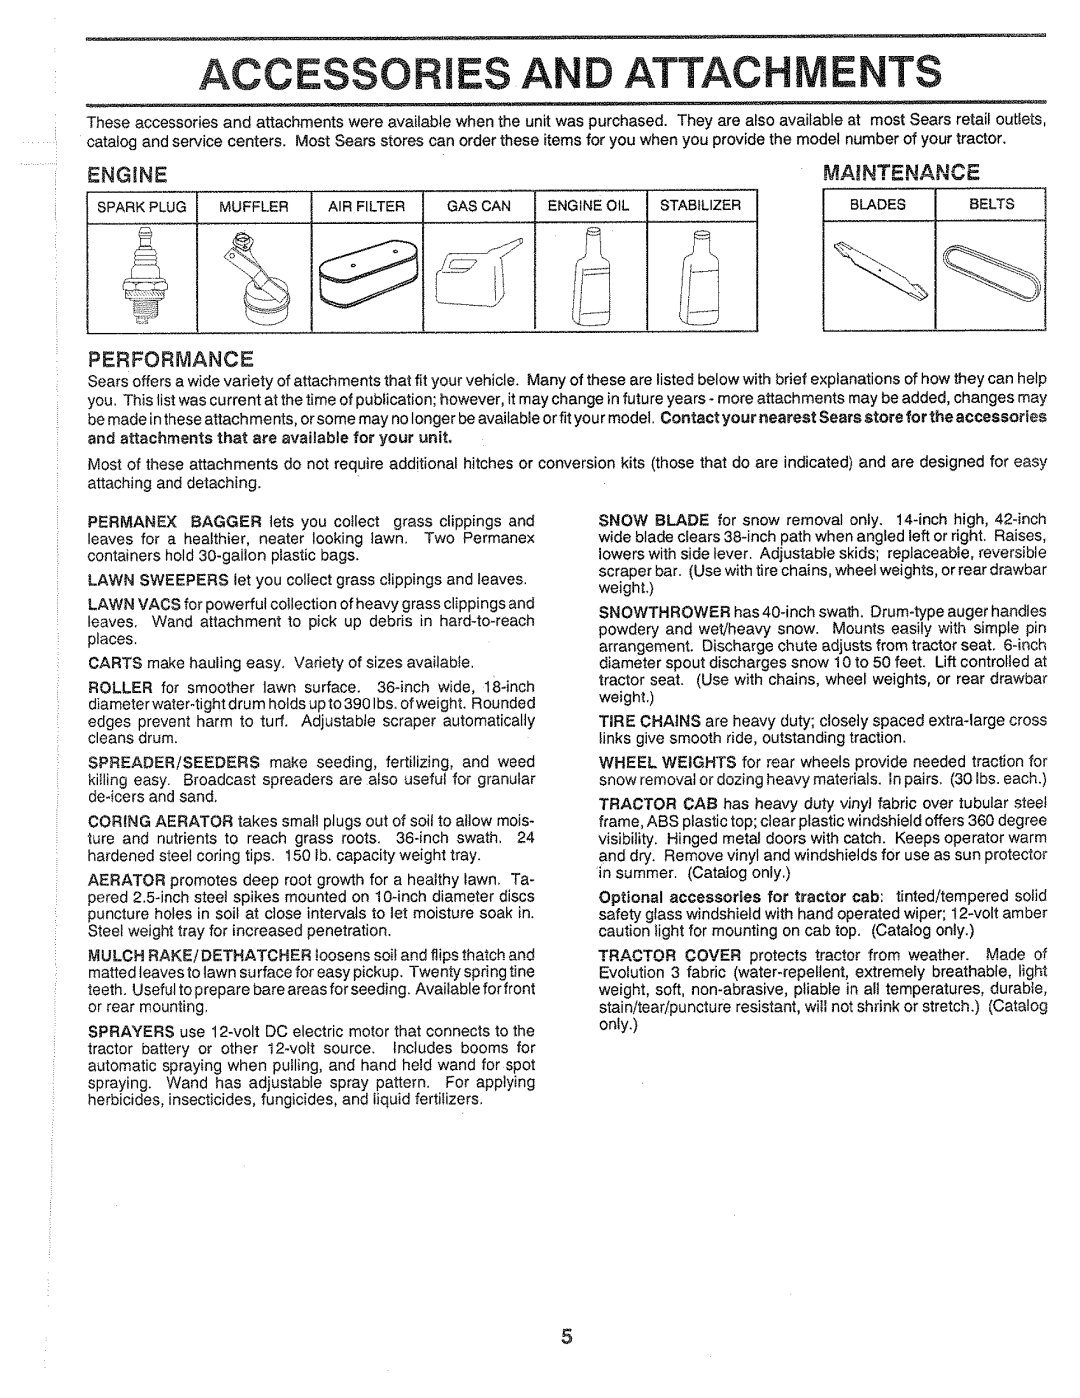 Sears 917.25559 manual Accessories An Attachments, Engine, Na_Ntenance, Performance 